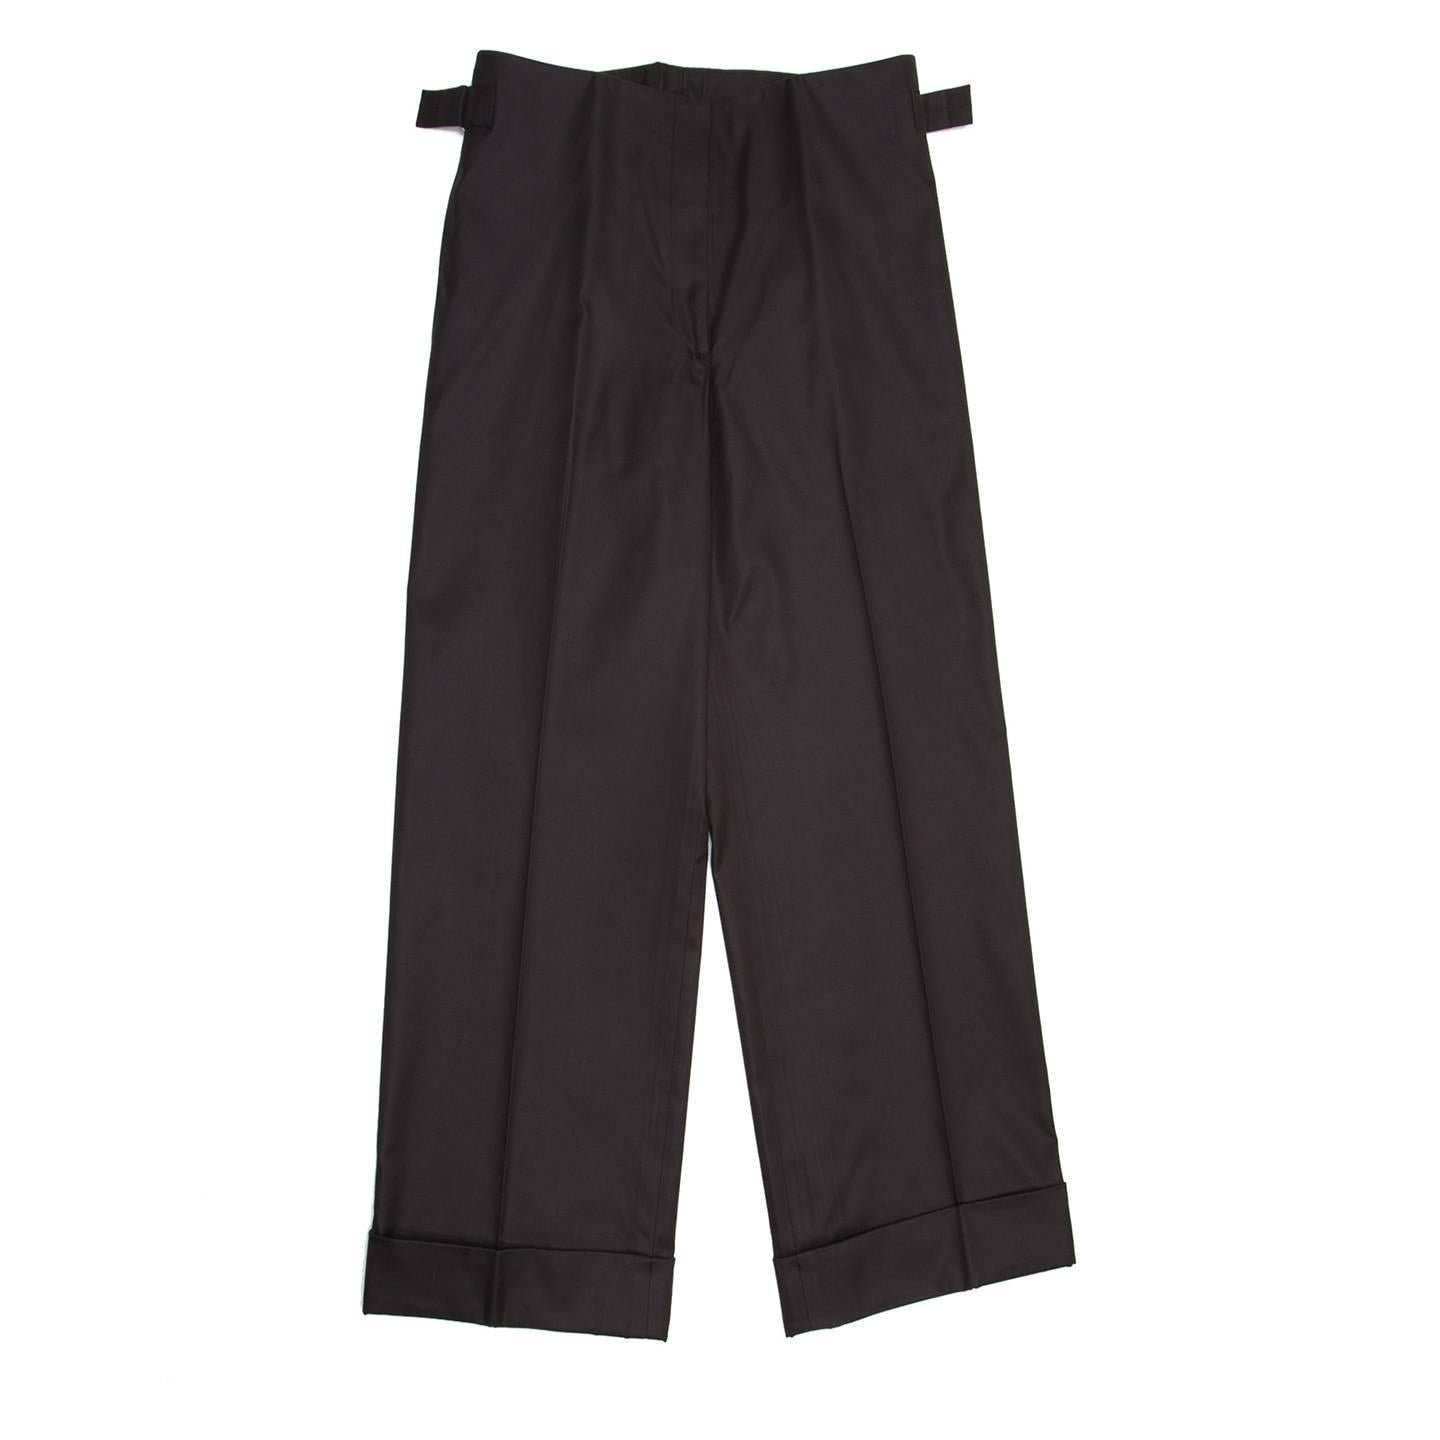 Black cotton suit pleated gaucho slack trousers with front slash pocket on the side seams and wide classic turn-ups. Two silver buckles at side seams enrich the waist and make it adjustable.

Size  42 French sizing

Condition  Excellent: never worn